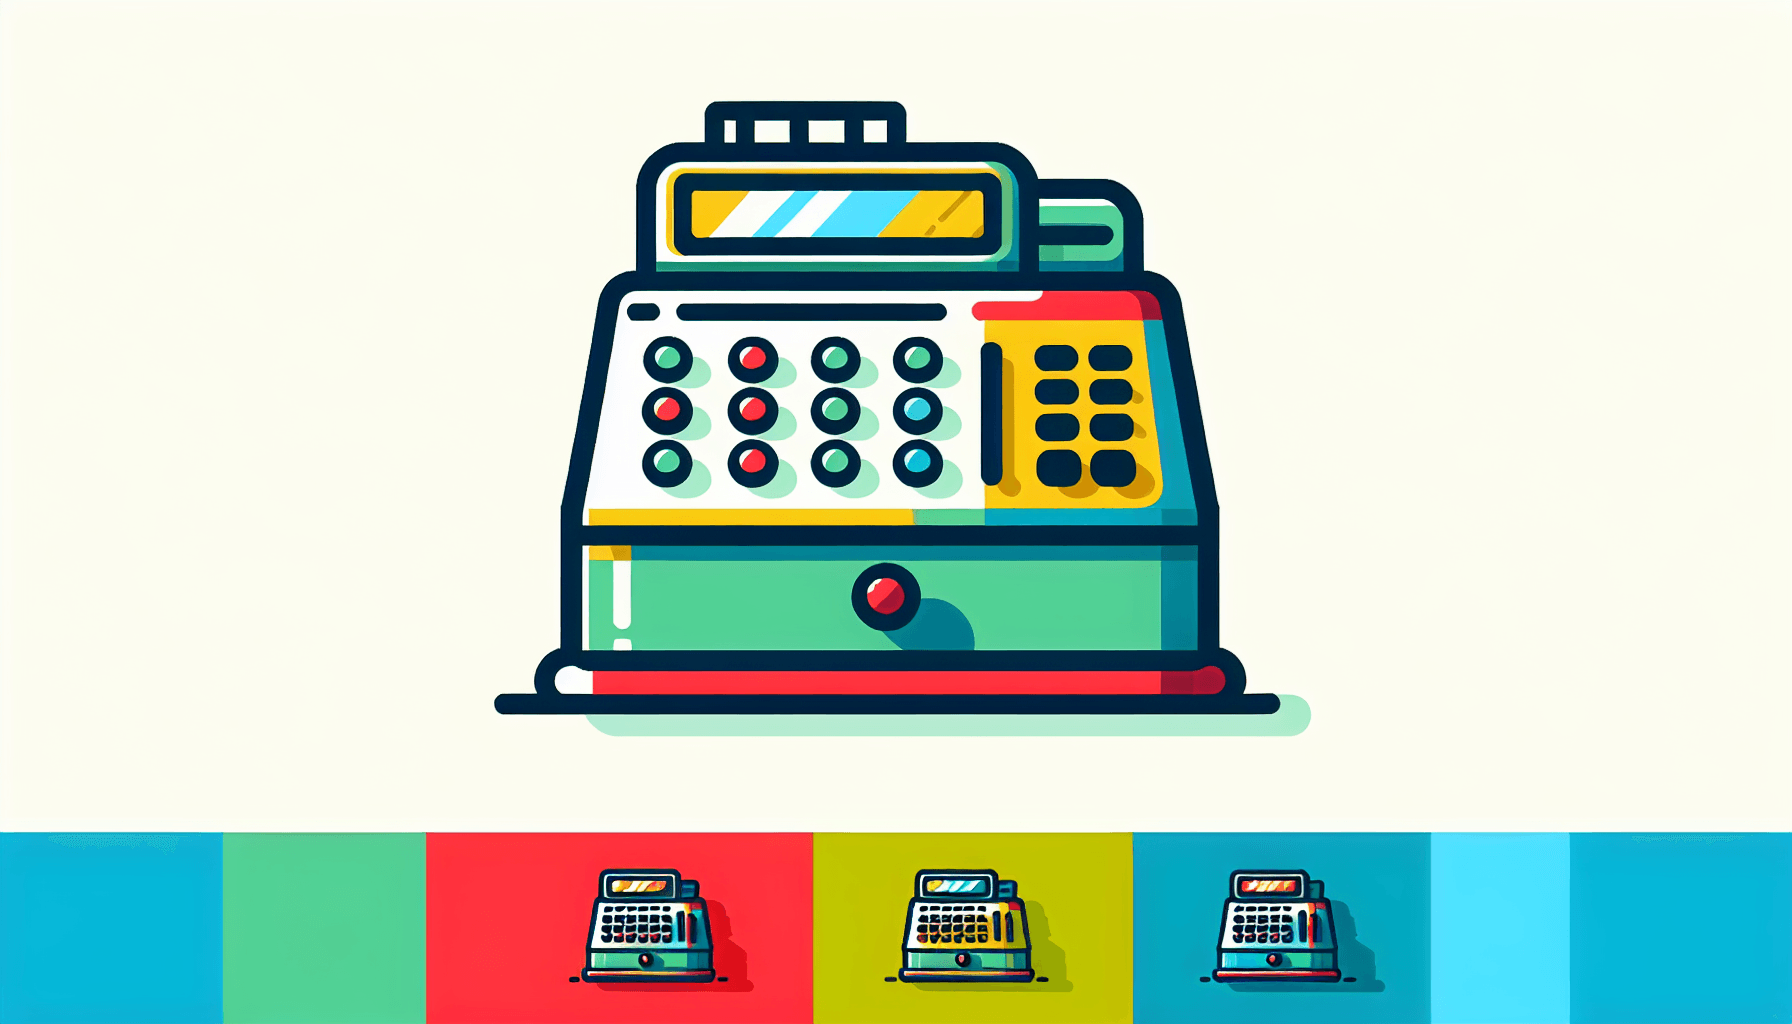 Cash register in flat illustration style and white background, red #f47574, green #88c7a8, yellow #fcc44b, and blue #645bc8 colors.